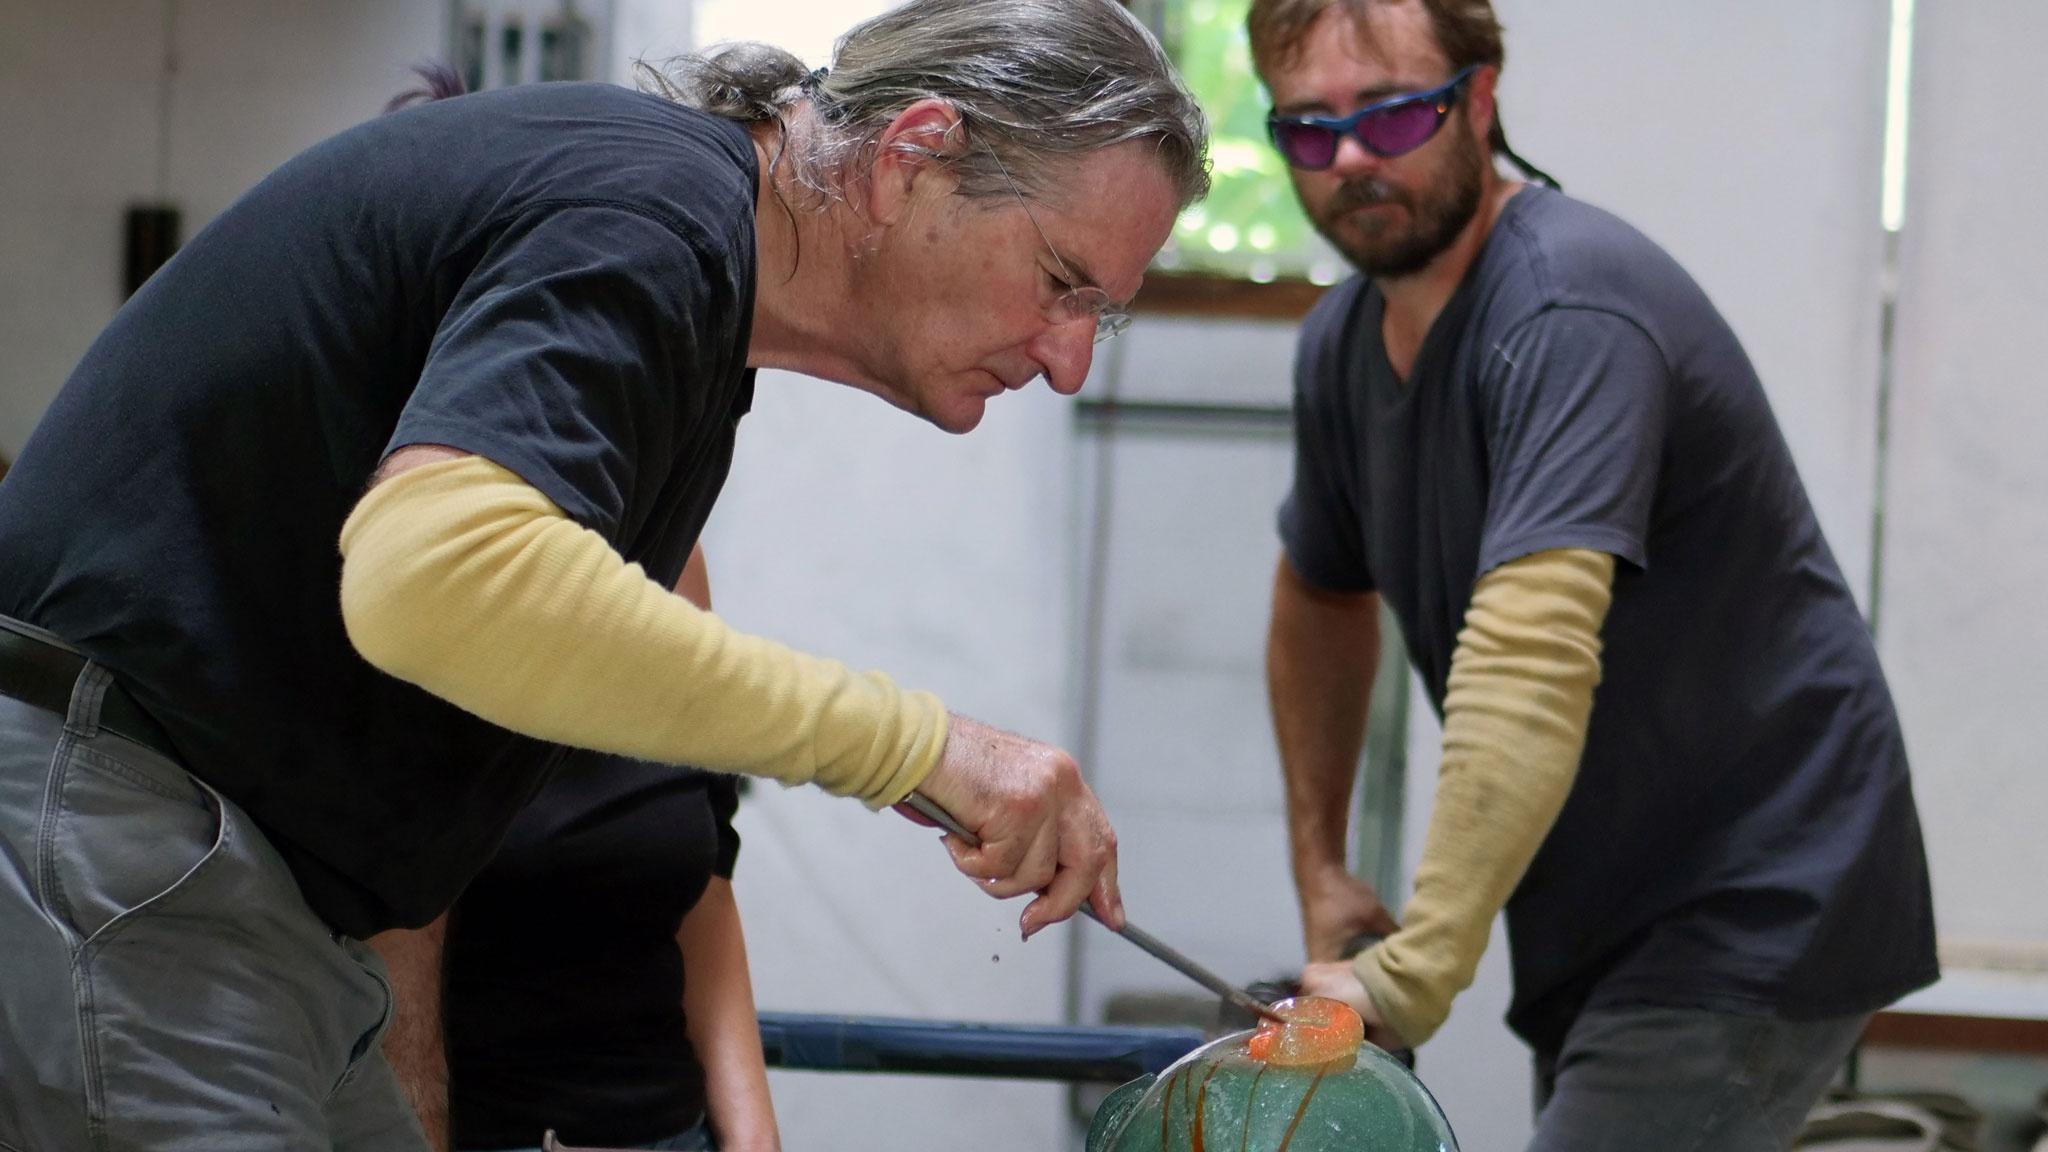 Glass artist Richard Jolley featured in the HARMONY episode streaming on PBS Video App Nov 4, 2021